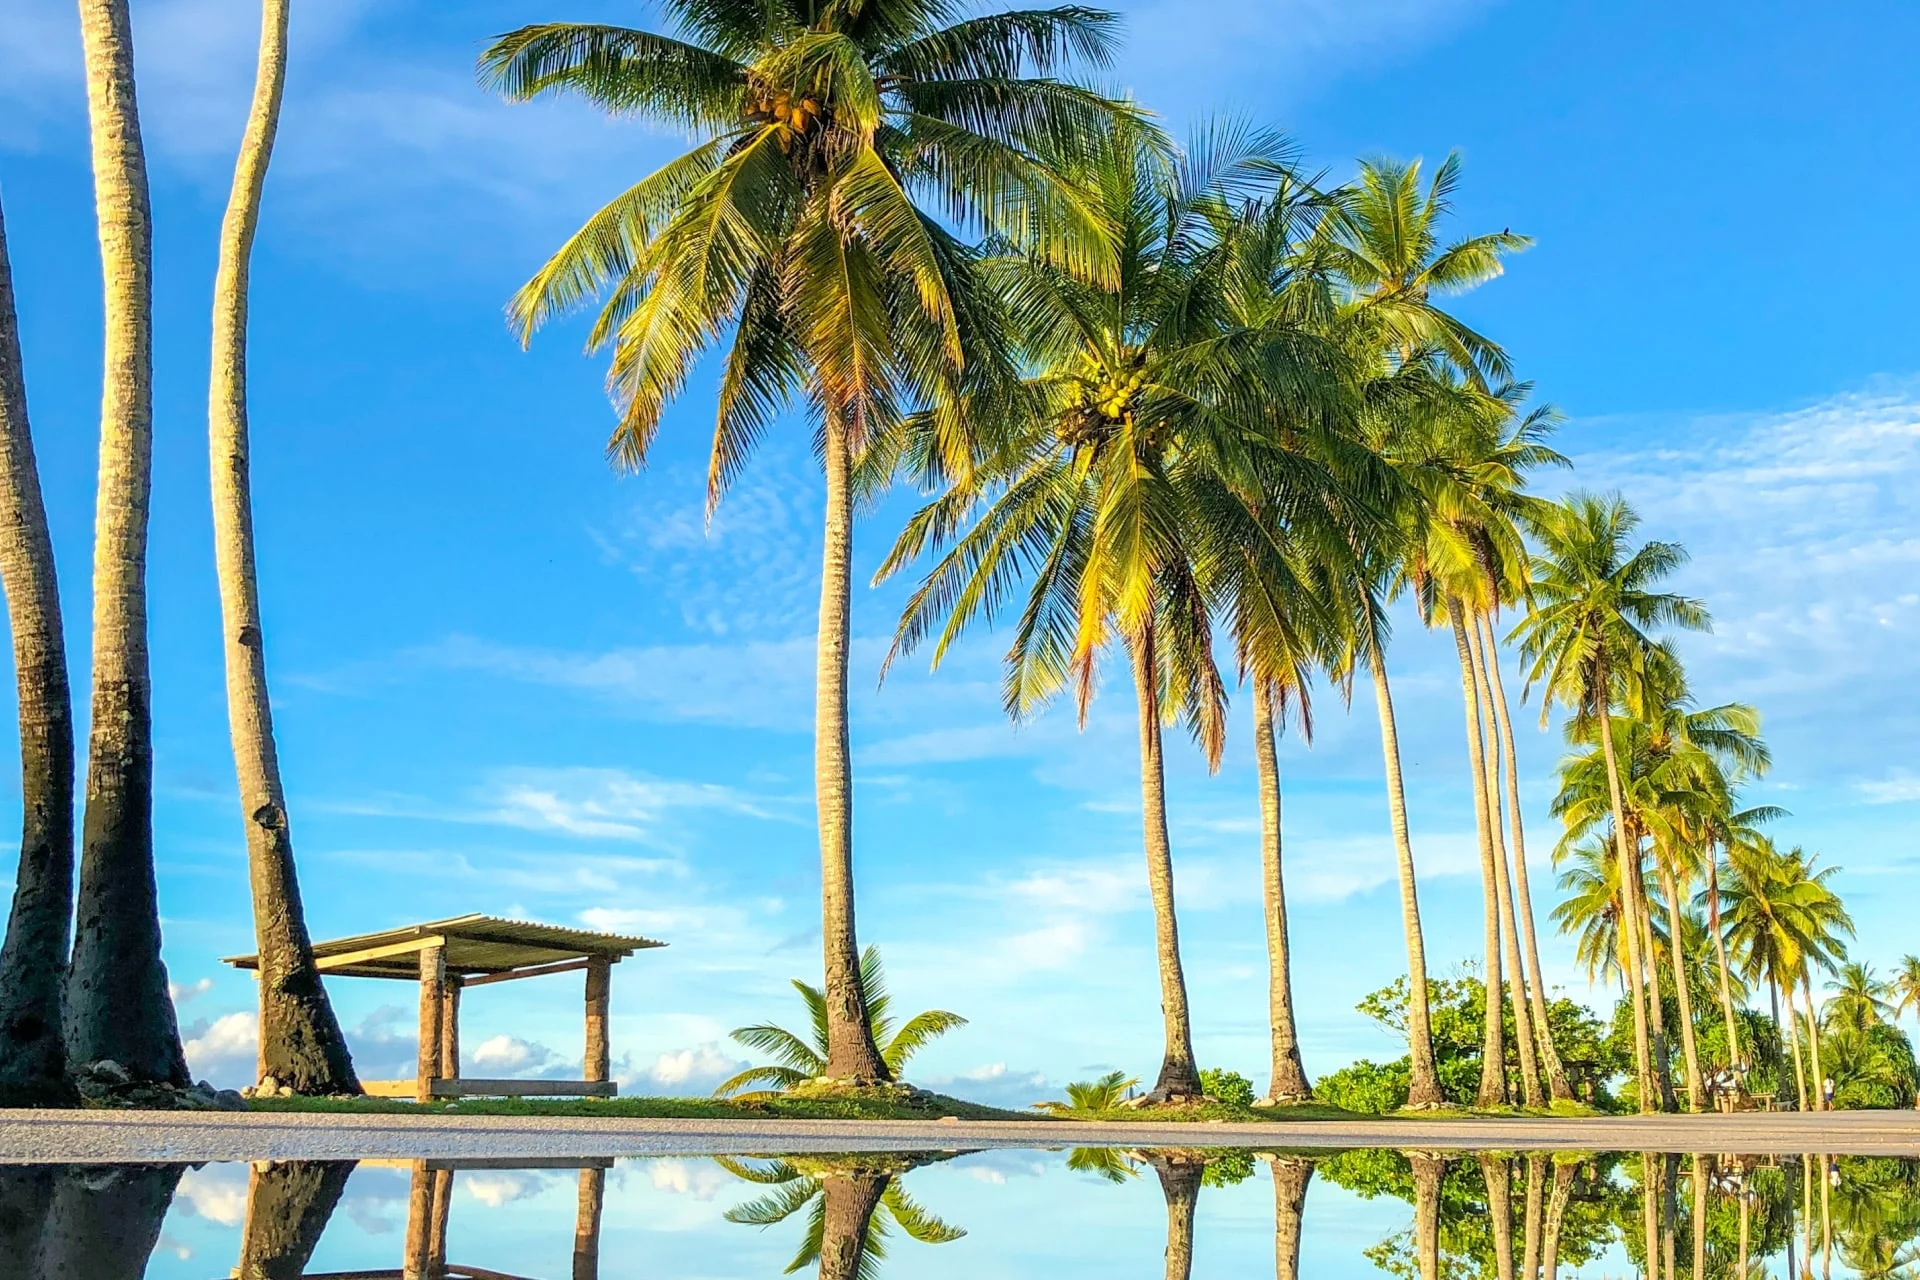 A beach with palm trees reflected in the water.